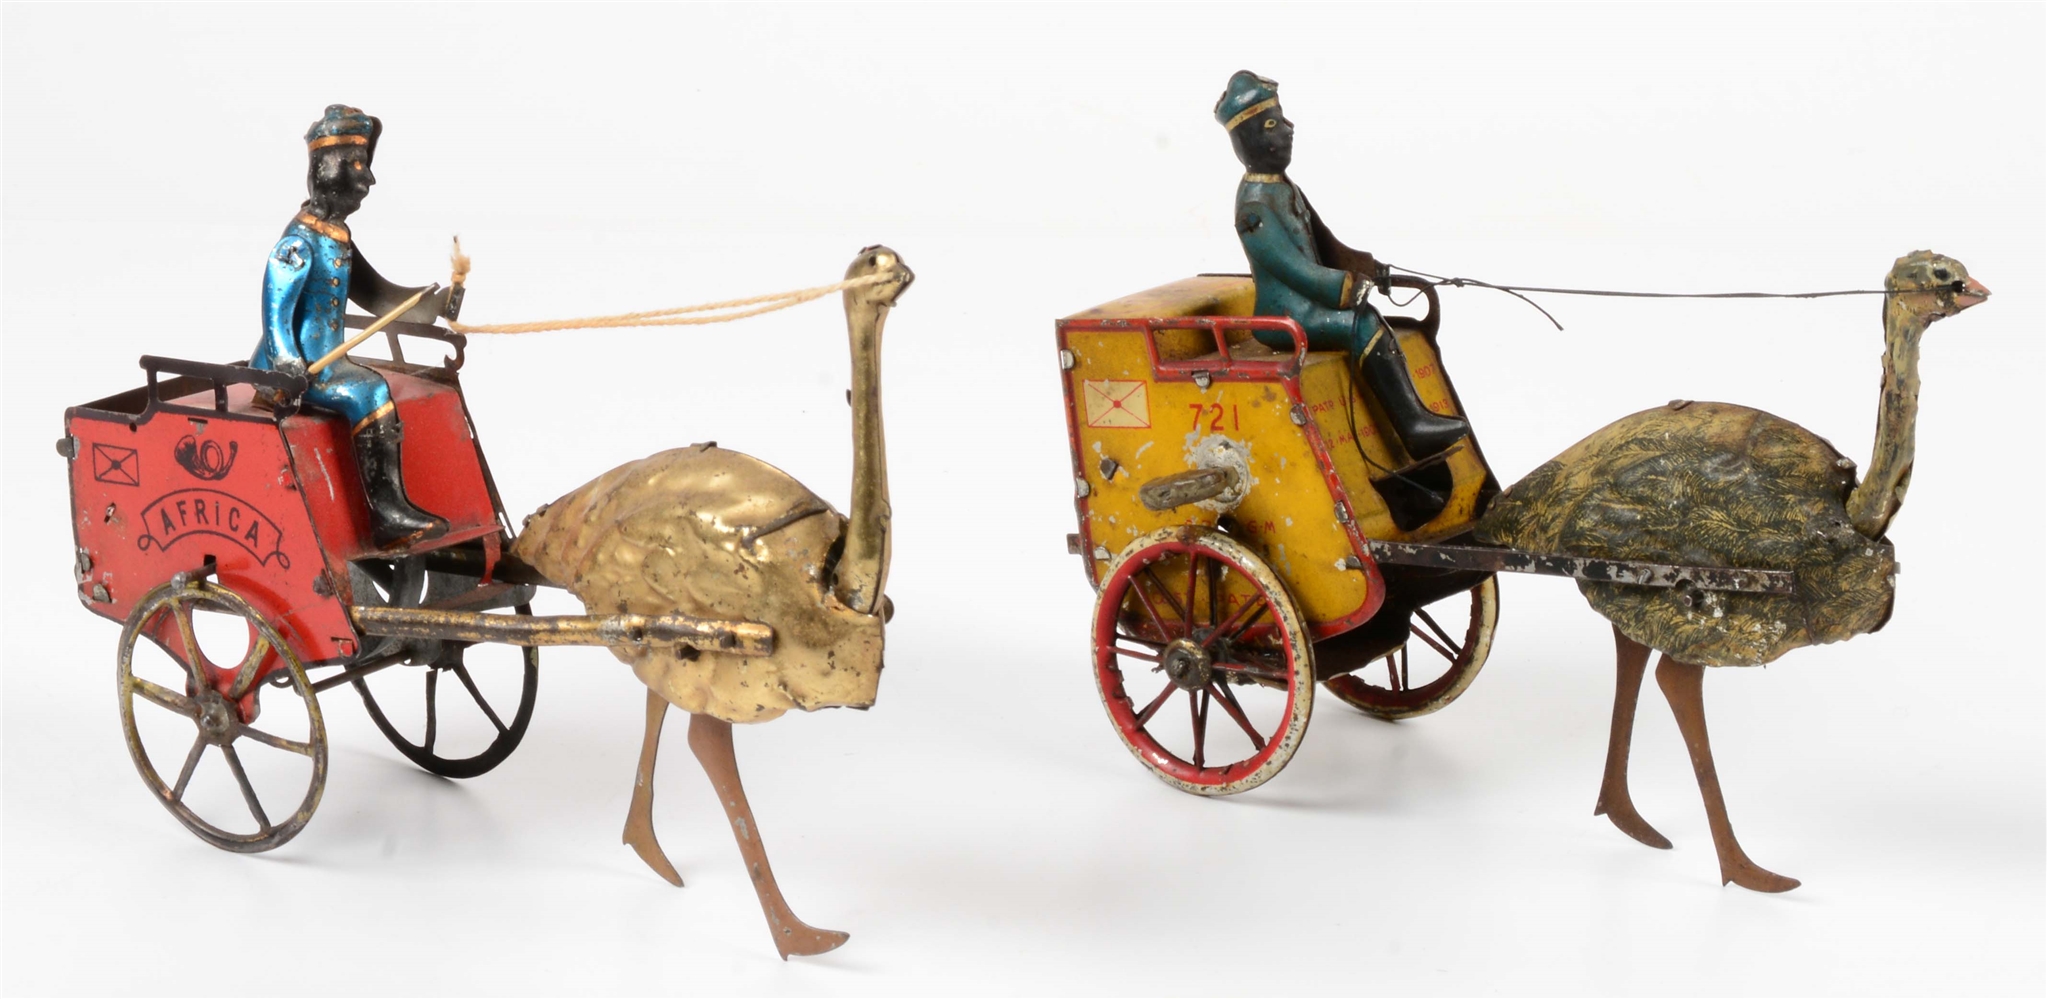 LOT OF 2: EARLY LEHMANN OSTRICH CART TOYS, PULLED BY DRIVERS.